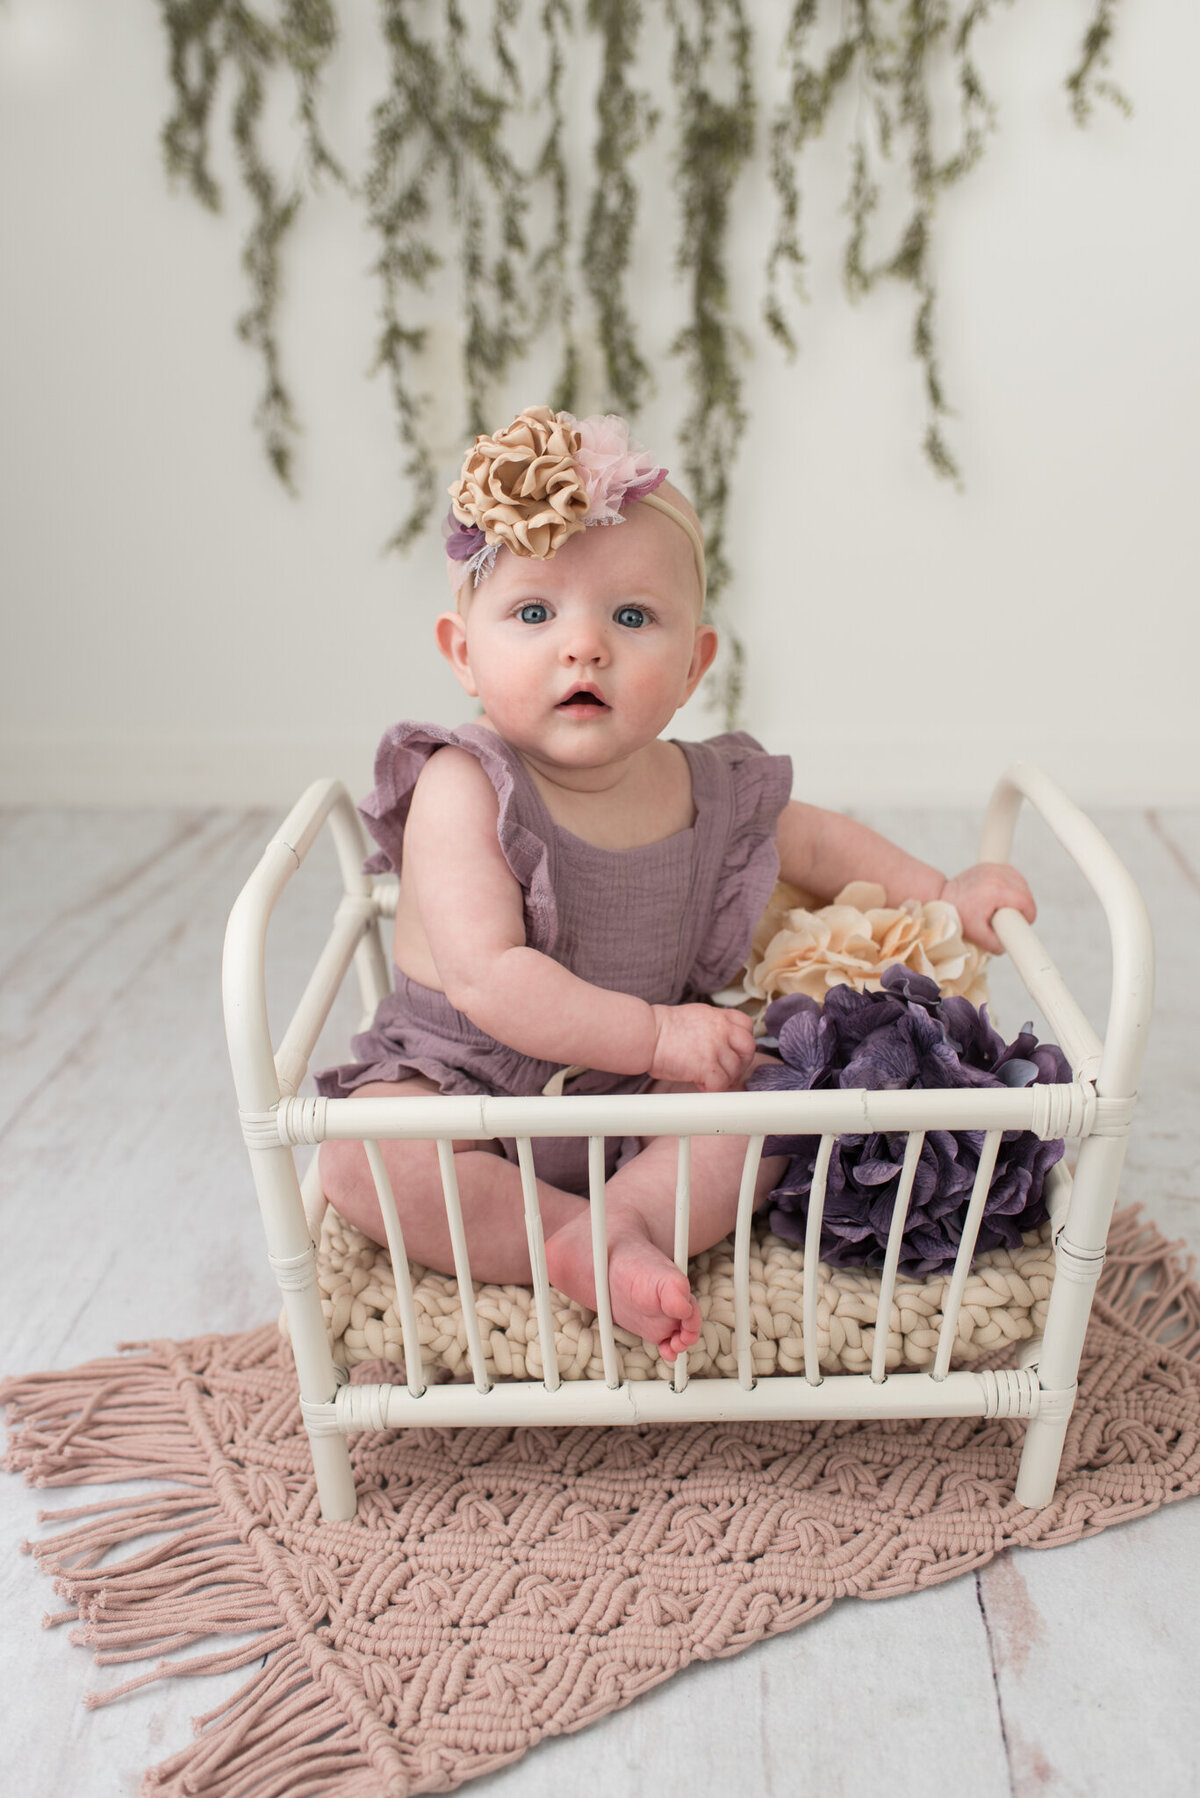 Infant girl sitting in a white crib with a purple romper and a floral headband